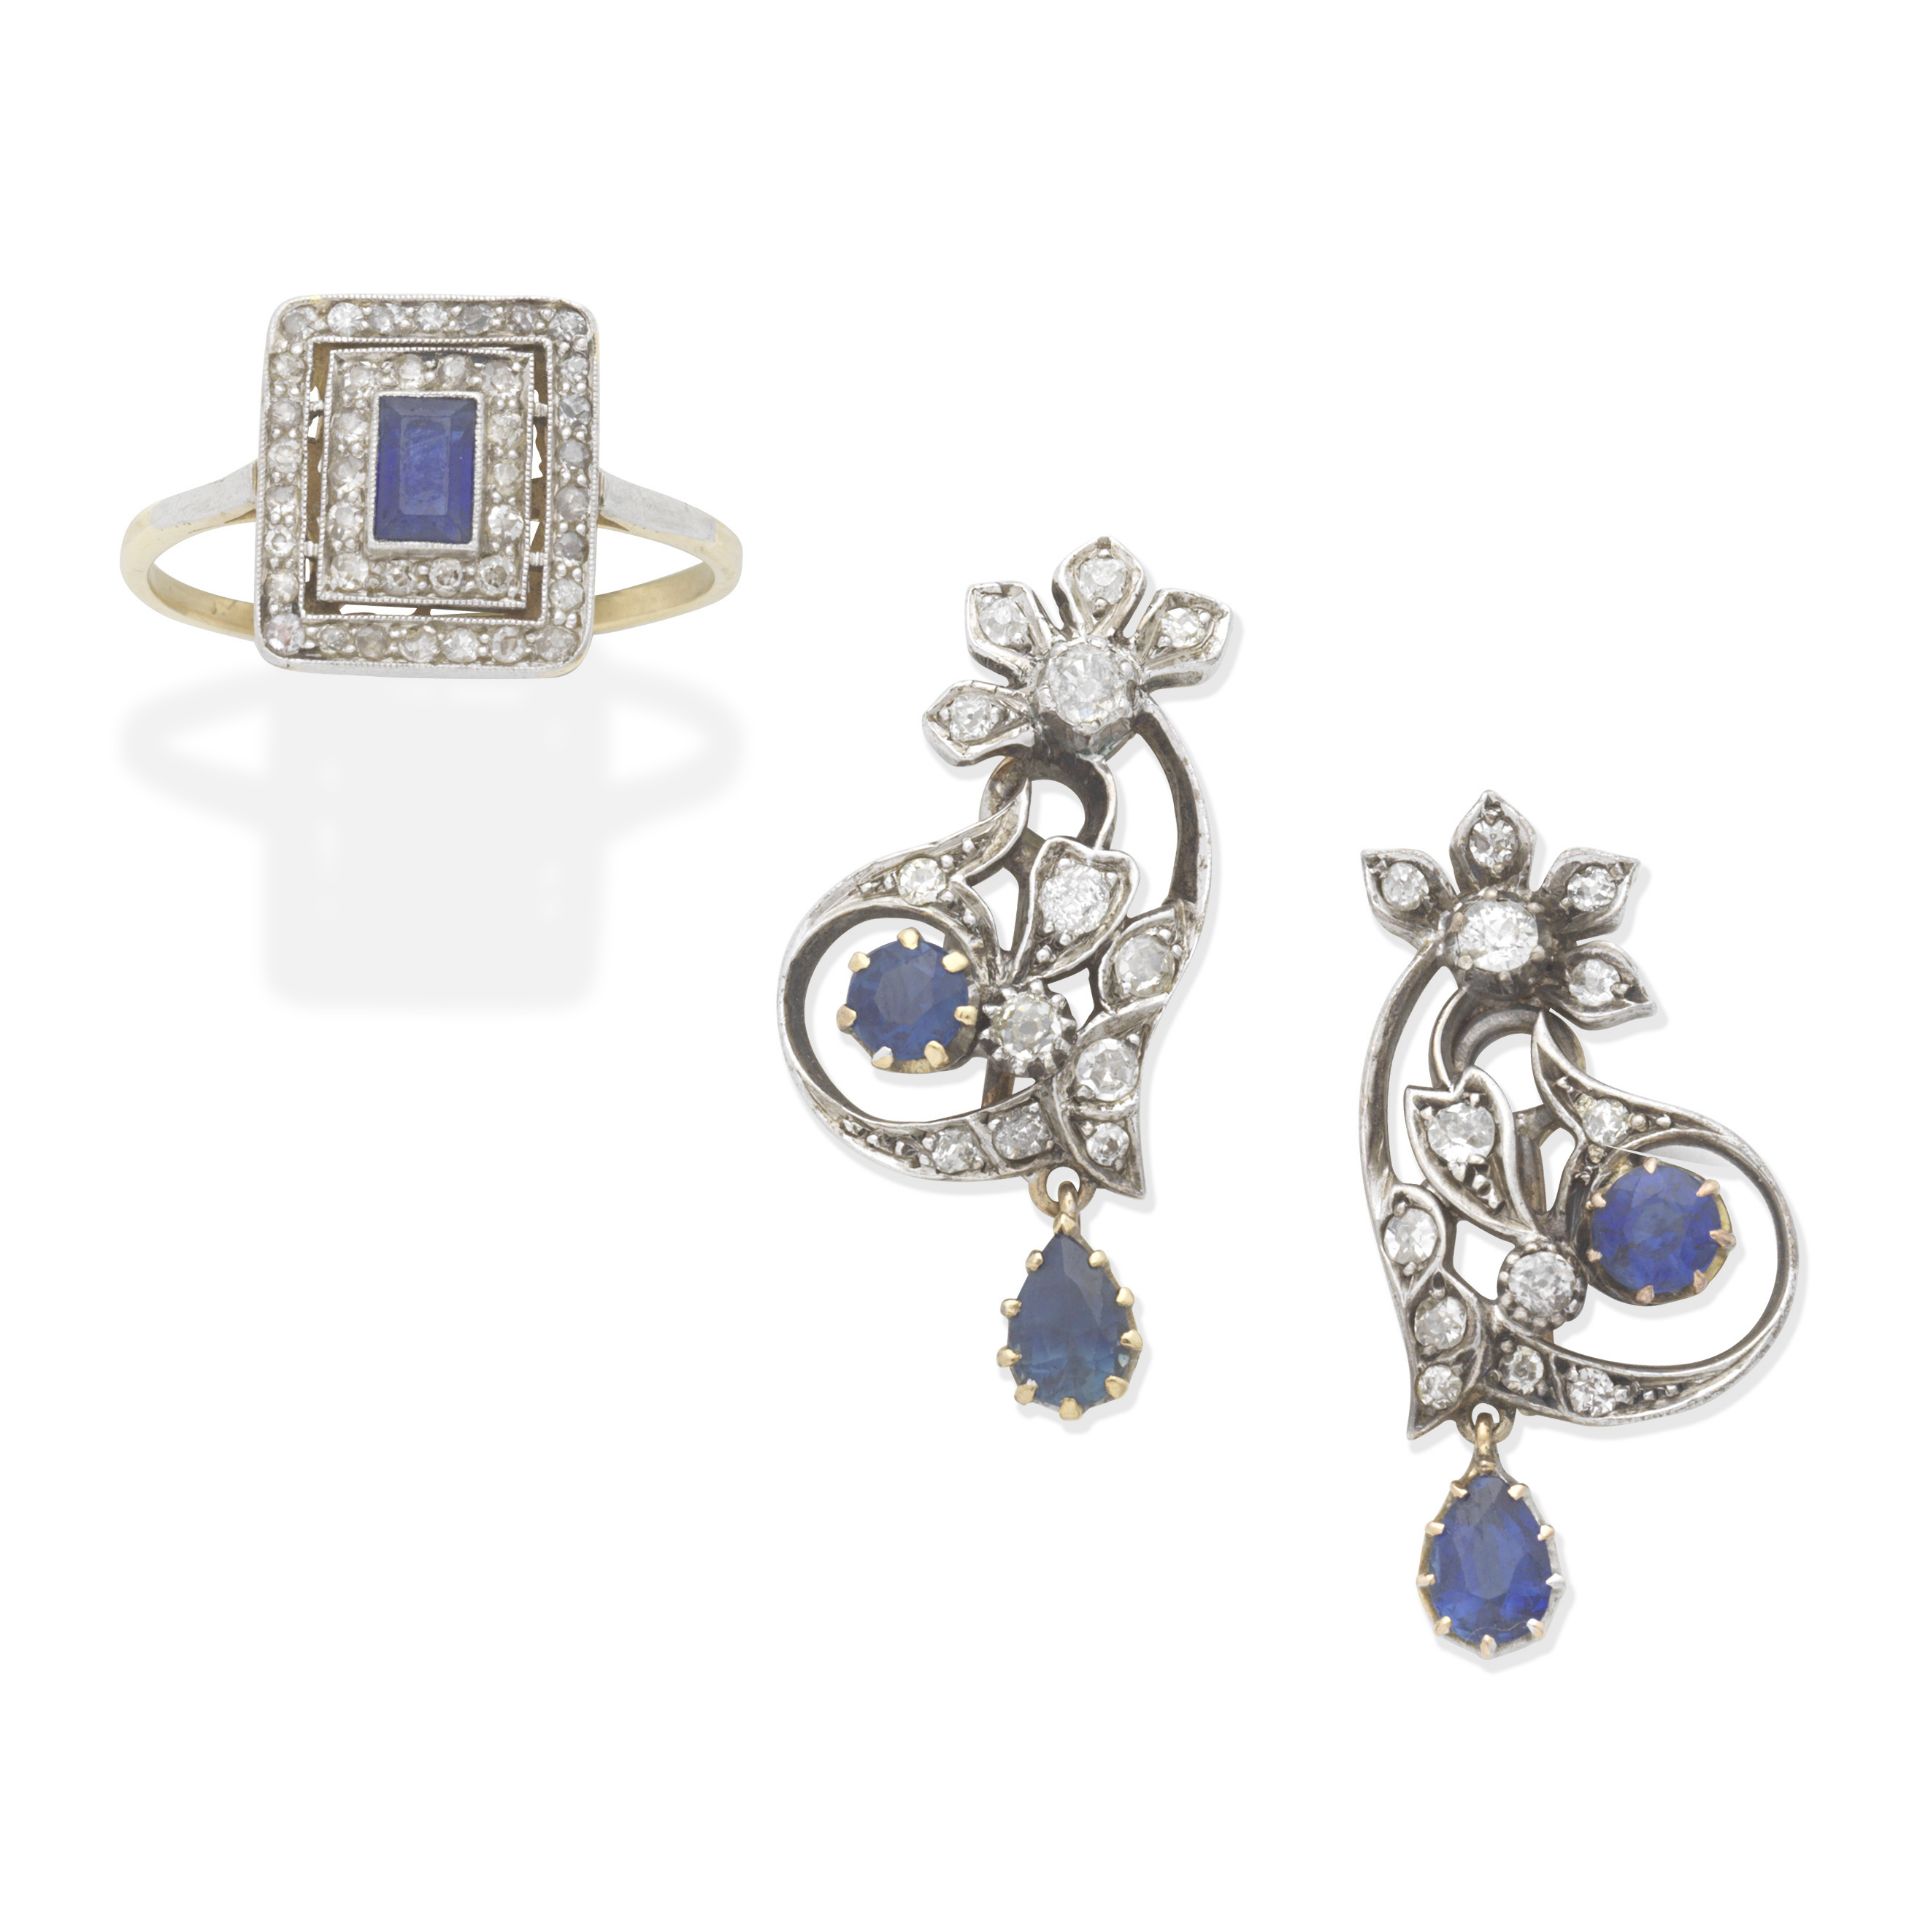 SAPPHIRE AND DIAMOND RING AND EARRINGS (2)